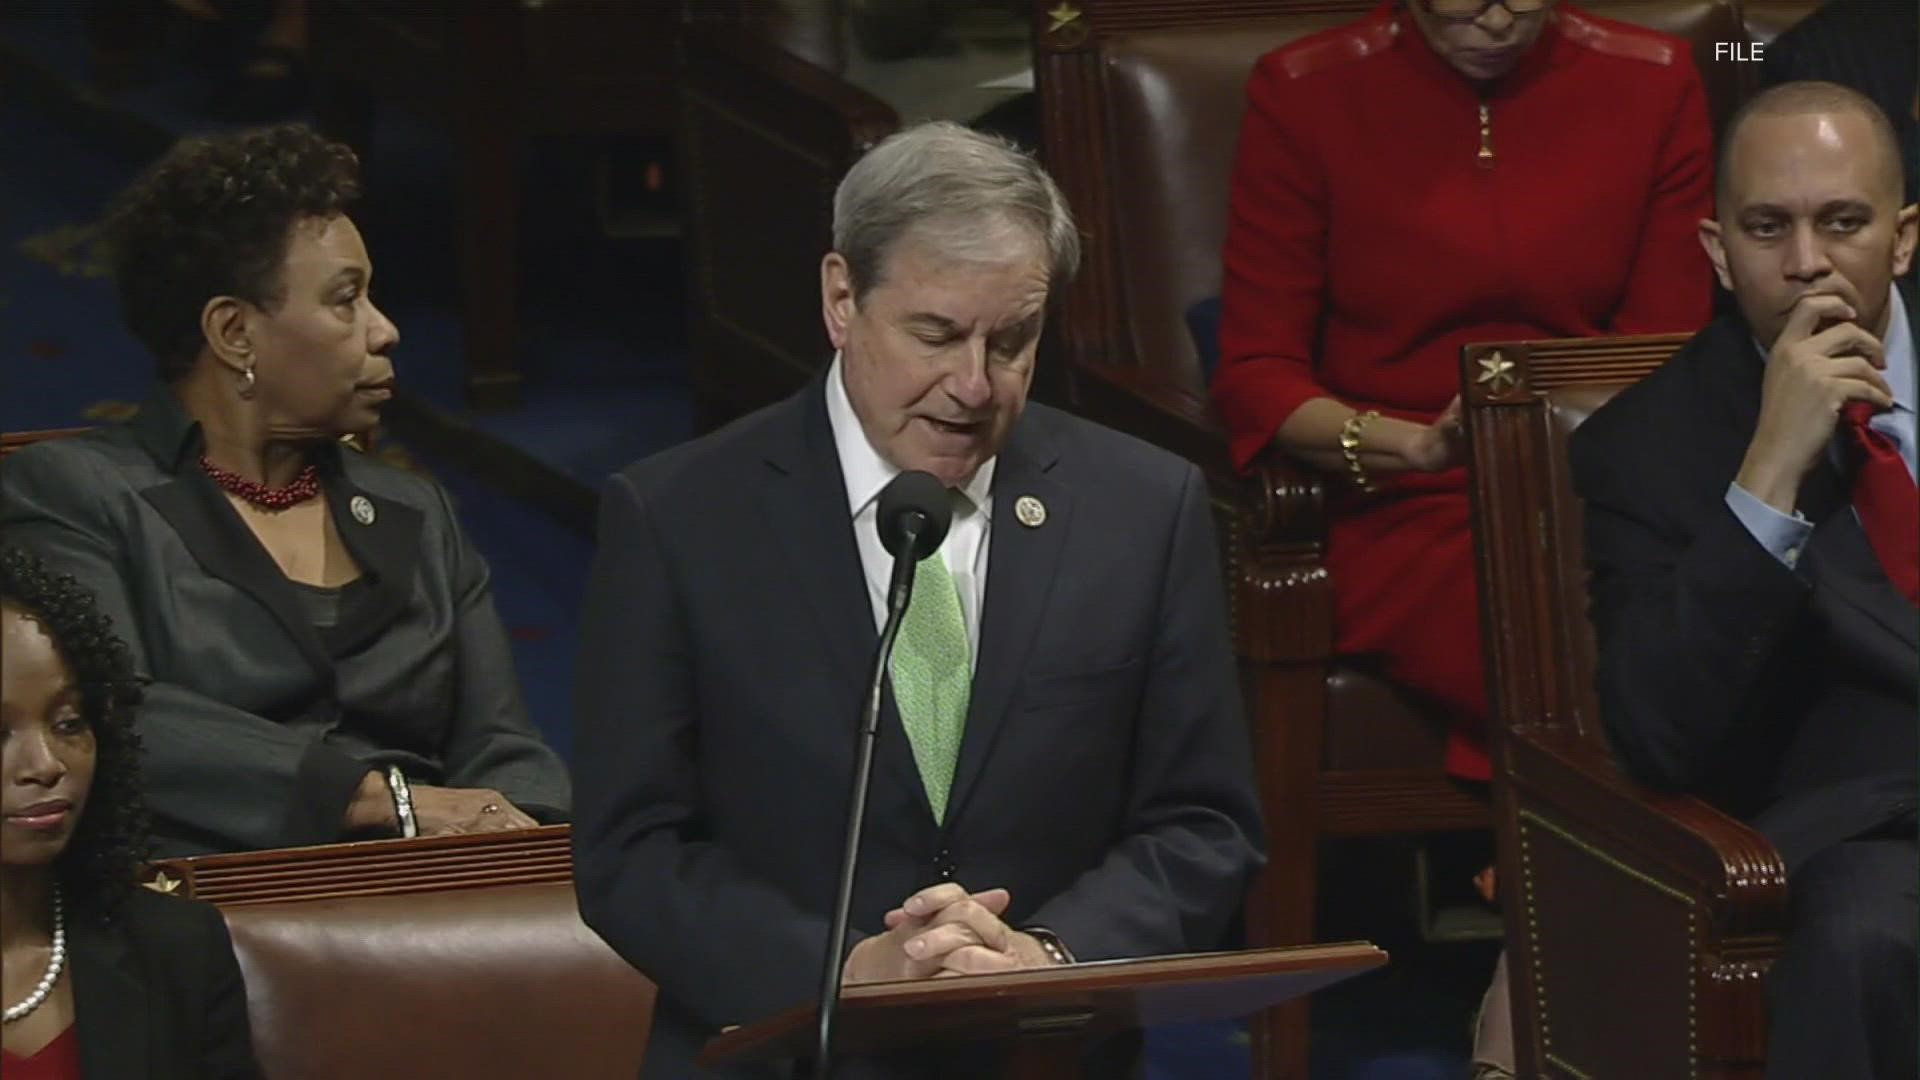 Yarmuth has held several powerful positions within the house over the past 16 years, including his current position as chair of the house budget committee.